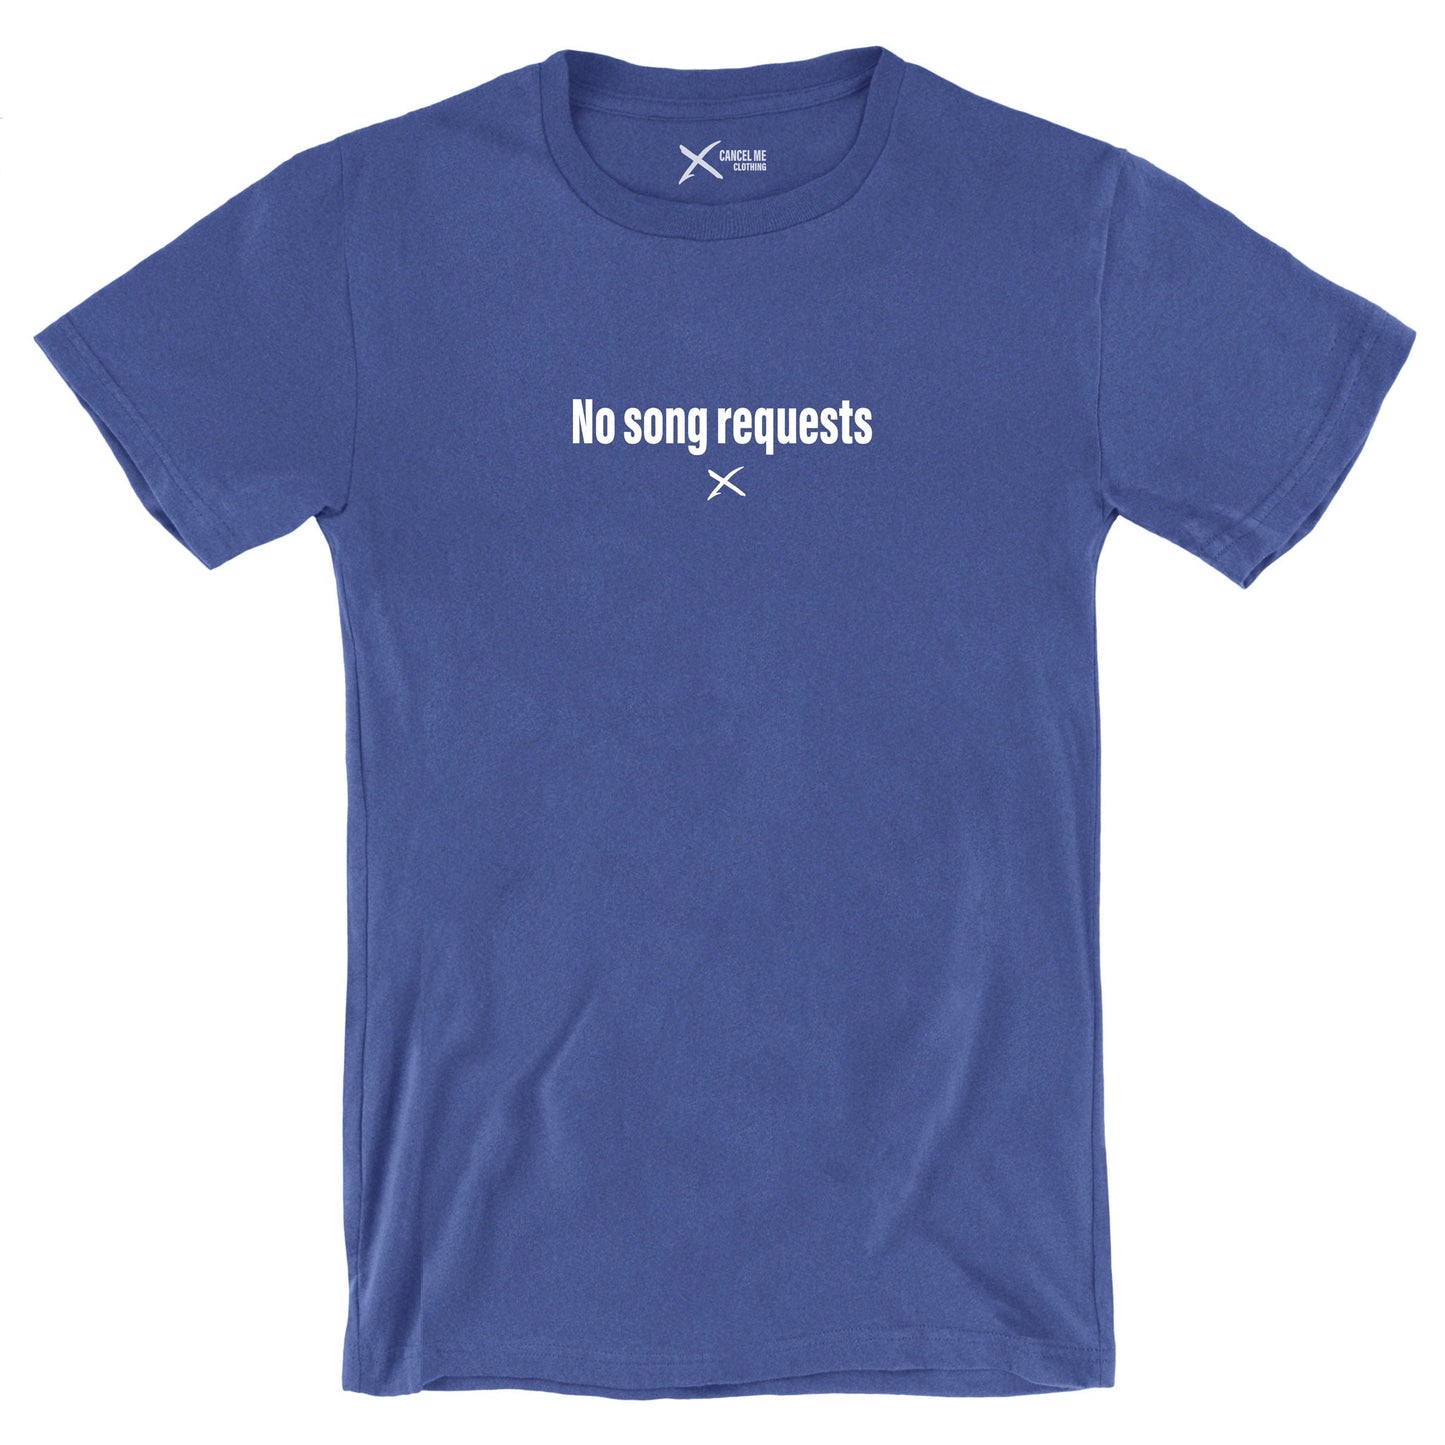 No song requests - Shirt